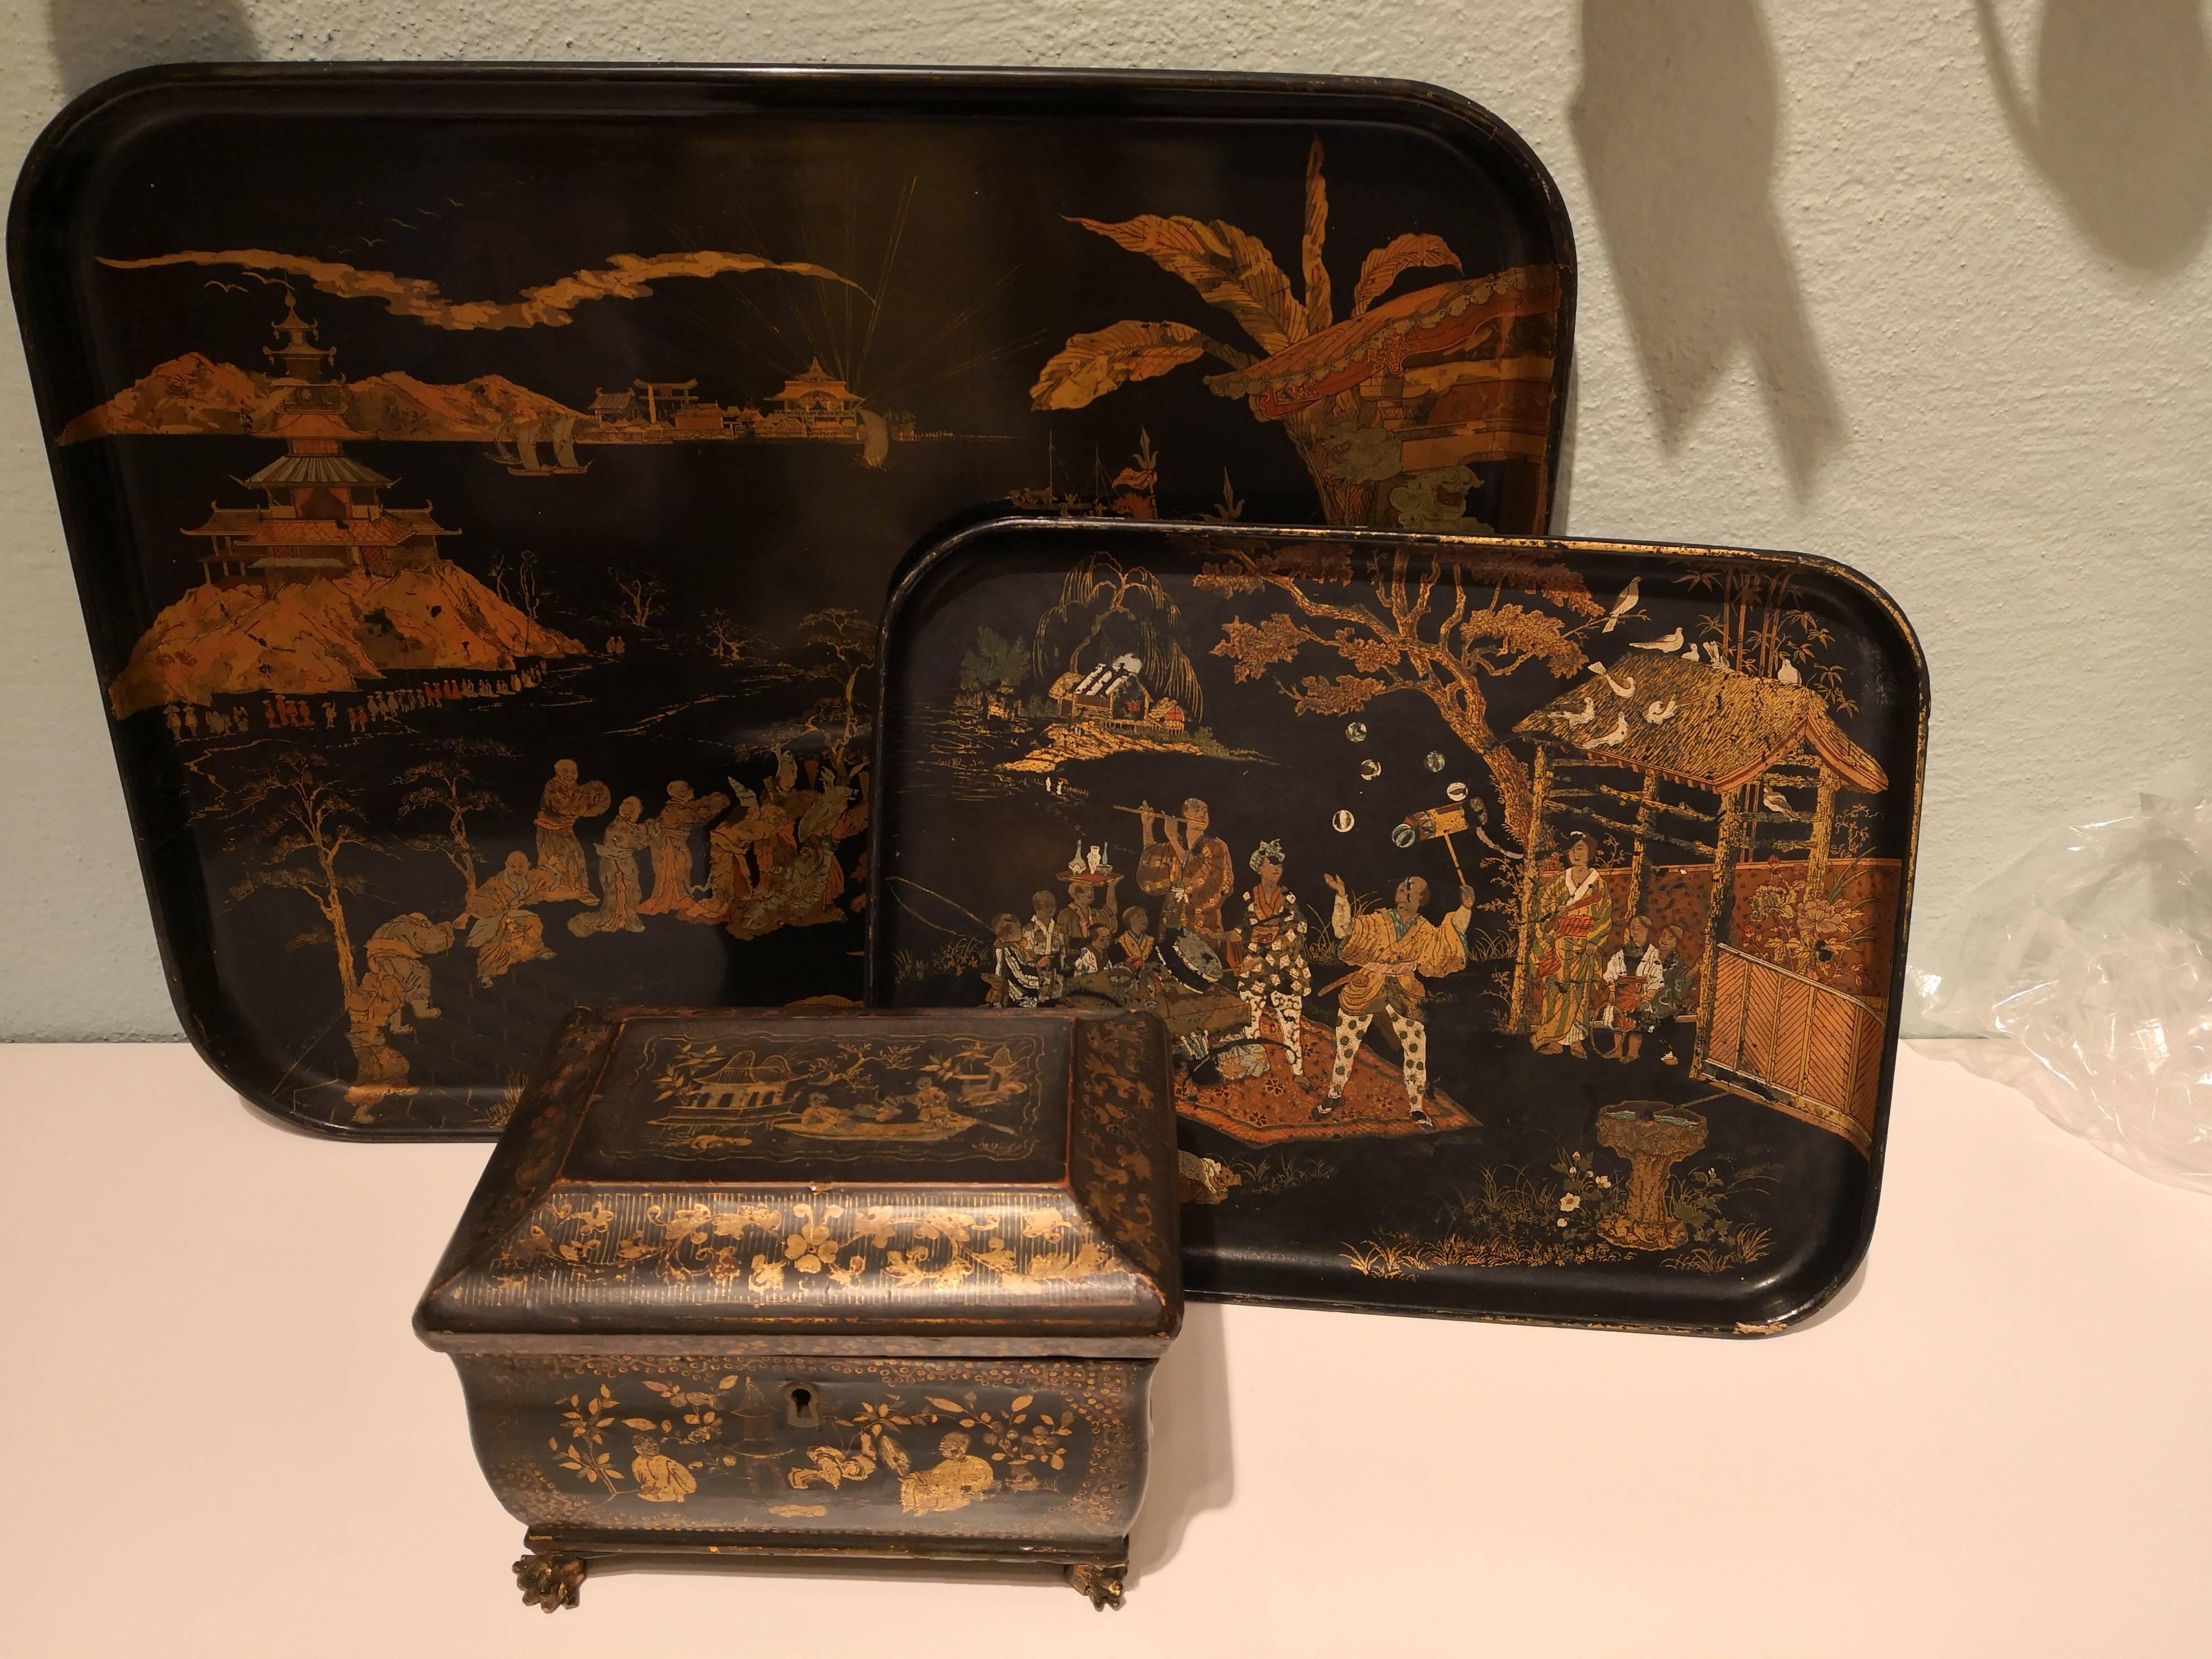 19th Century Chinoiserie Tray Black with Gold Details (19. Jahrhundert)